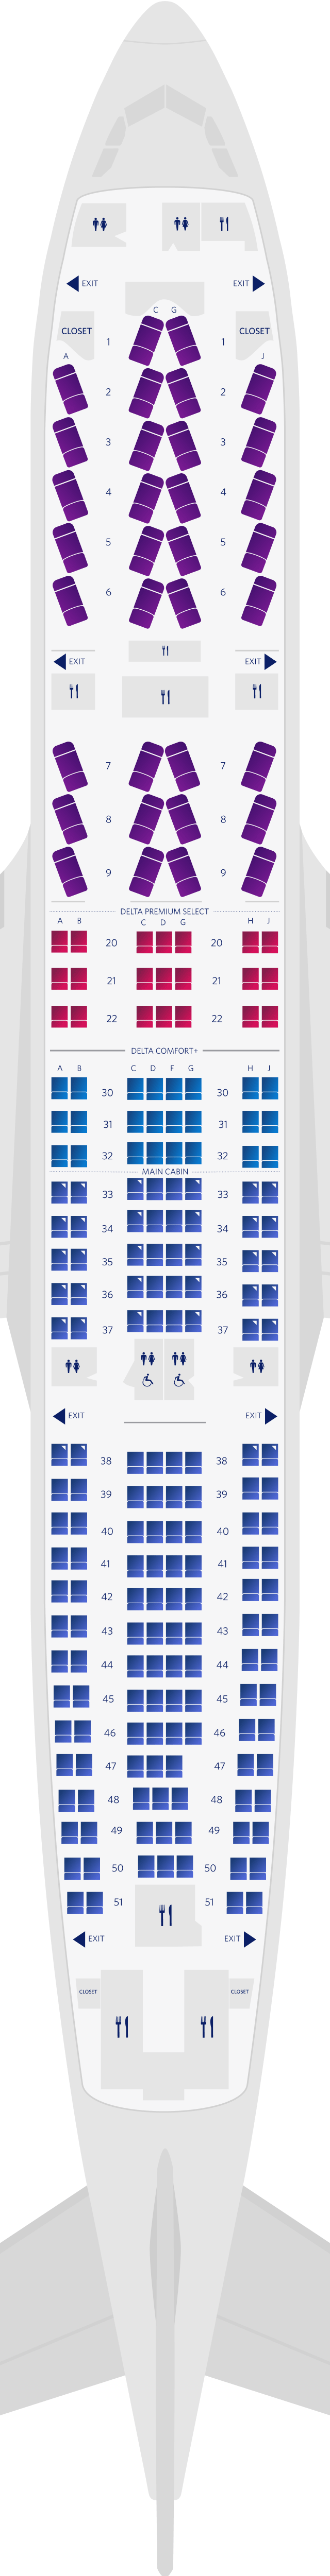 Airbus A330-200 4-Cabin Seat Map